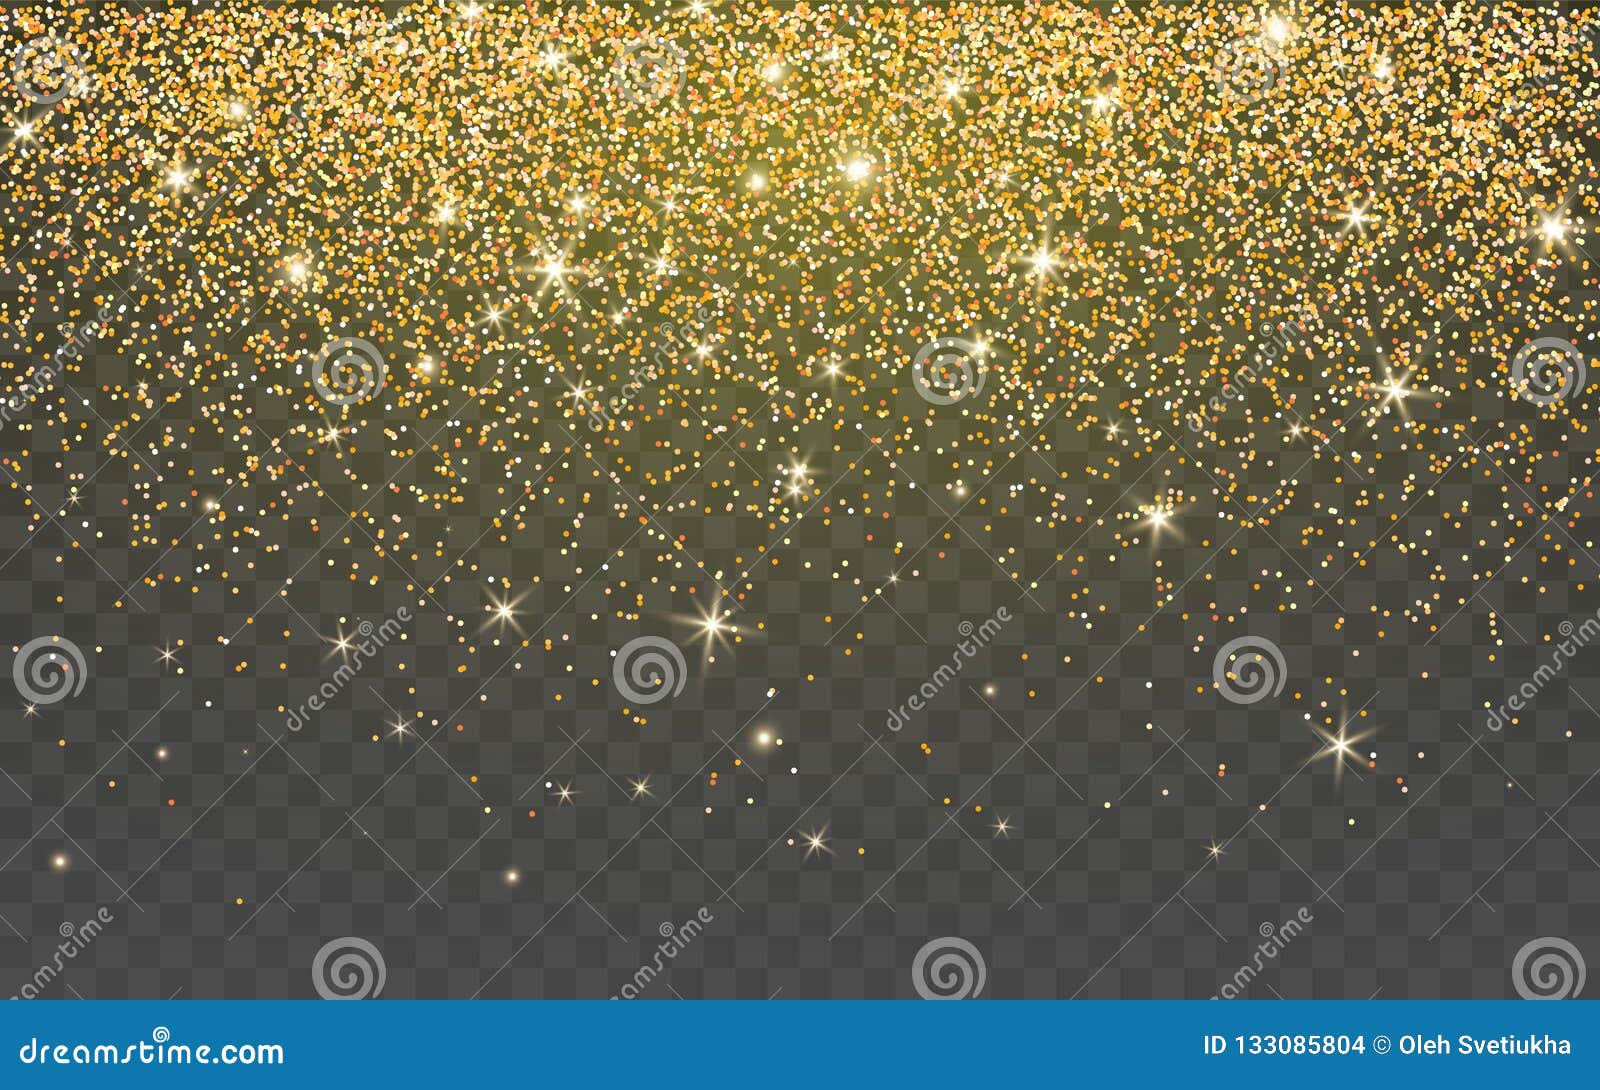 golden glitter sparkle on a transparent background. gold vibrant background with twinkle lights.  